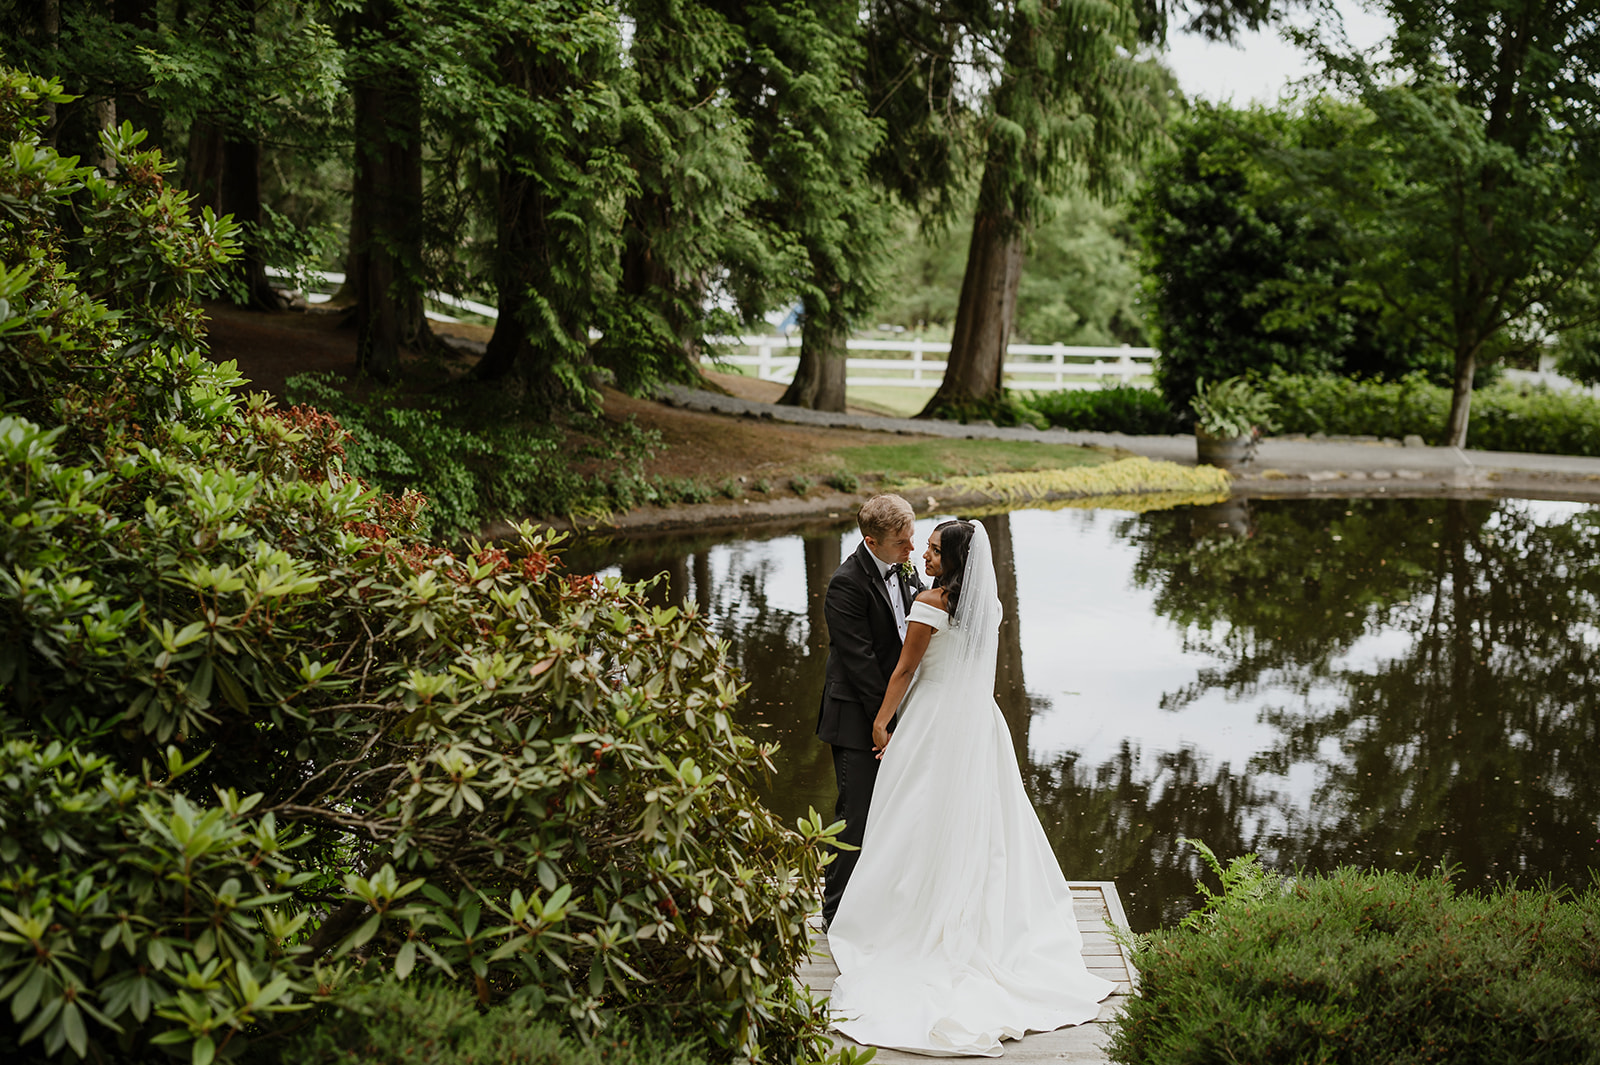 A bride and groom share a romantic moment by the tranquil pond surrounded by lush greenery at Chateau Lill in Woodinville.